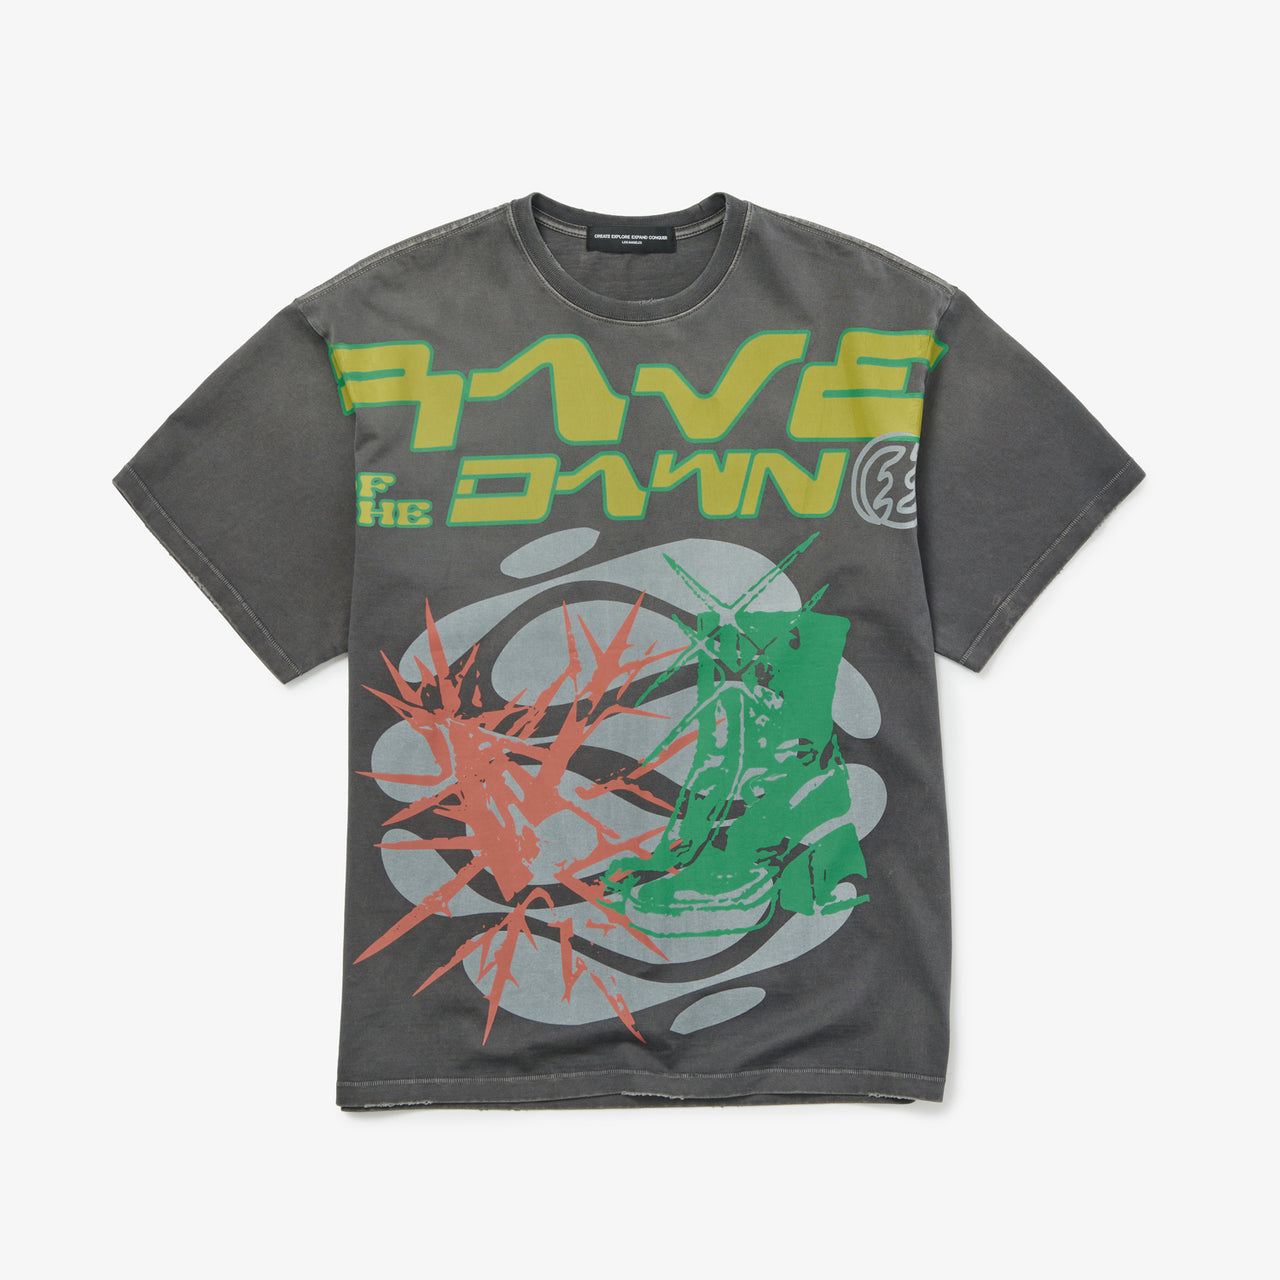 Rave of the Dawn Allover Print T-Shirt in Vintage Black